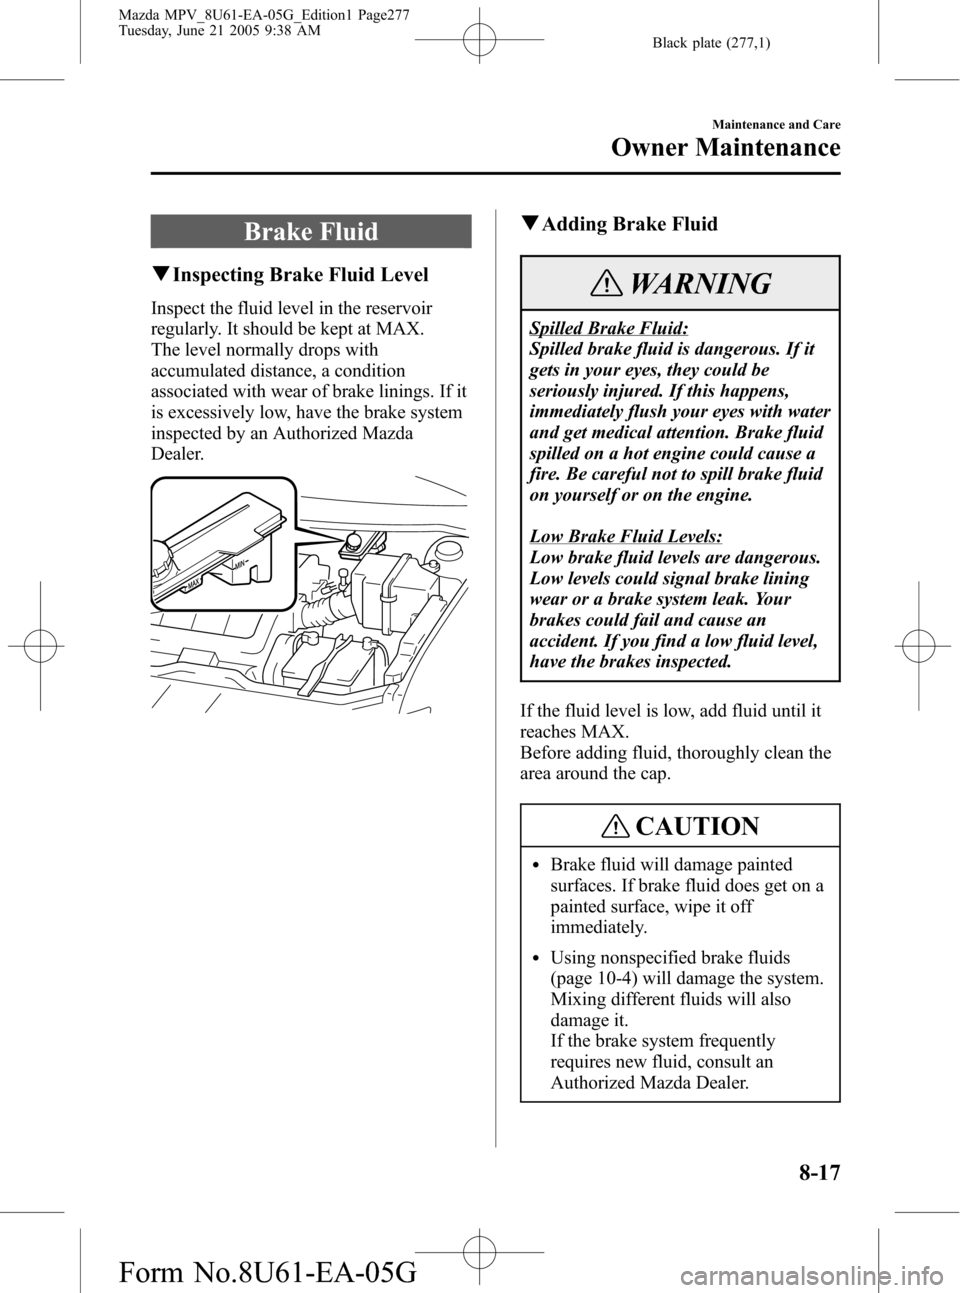 MAZDA MODEL MPV 2006  Owners Manual (in English) Black plate (277,1)
Brake Fluid
qInspecting Brake Fluid Level
Inspect the fluid level in the reservoir
regularly. It should be kept at MAX.
The level normally drops with
accumulated distance, a condit